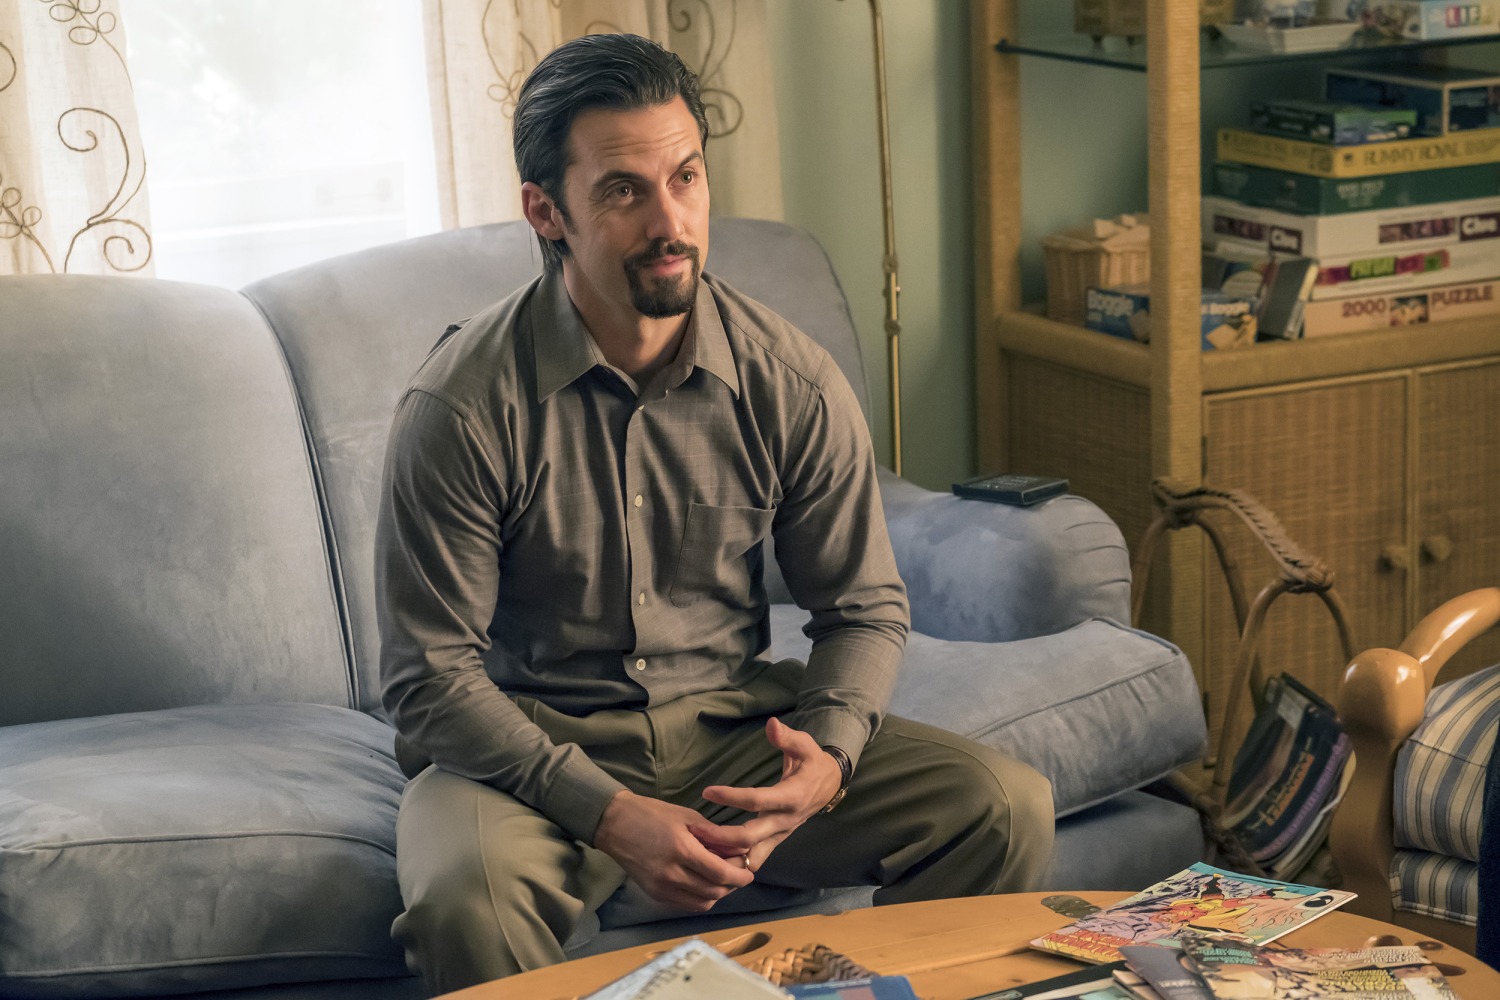 Can Crock-Pot sue 'This is Us' over controversial plot reveal?